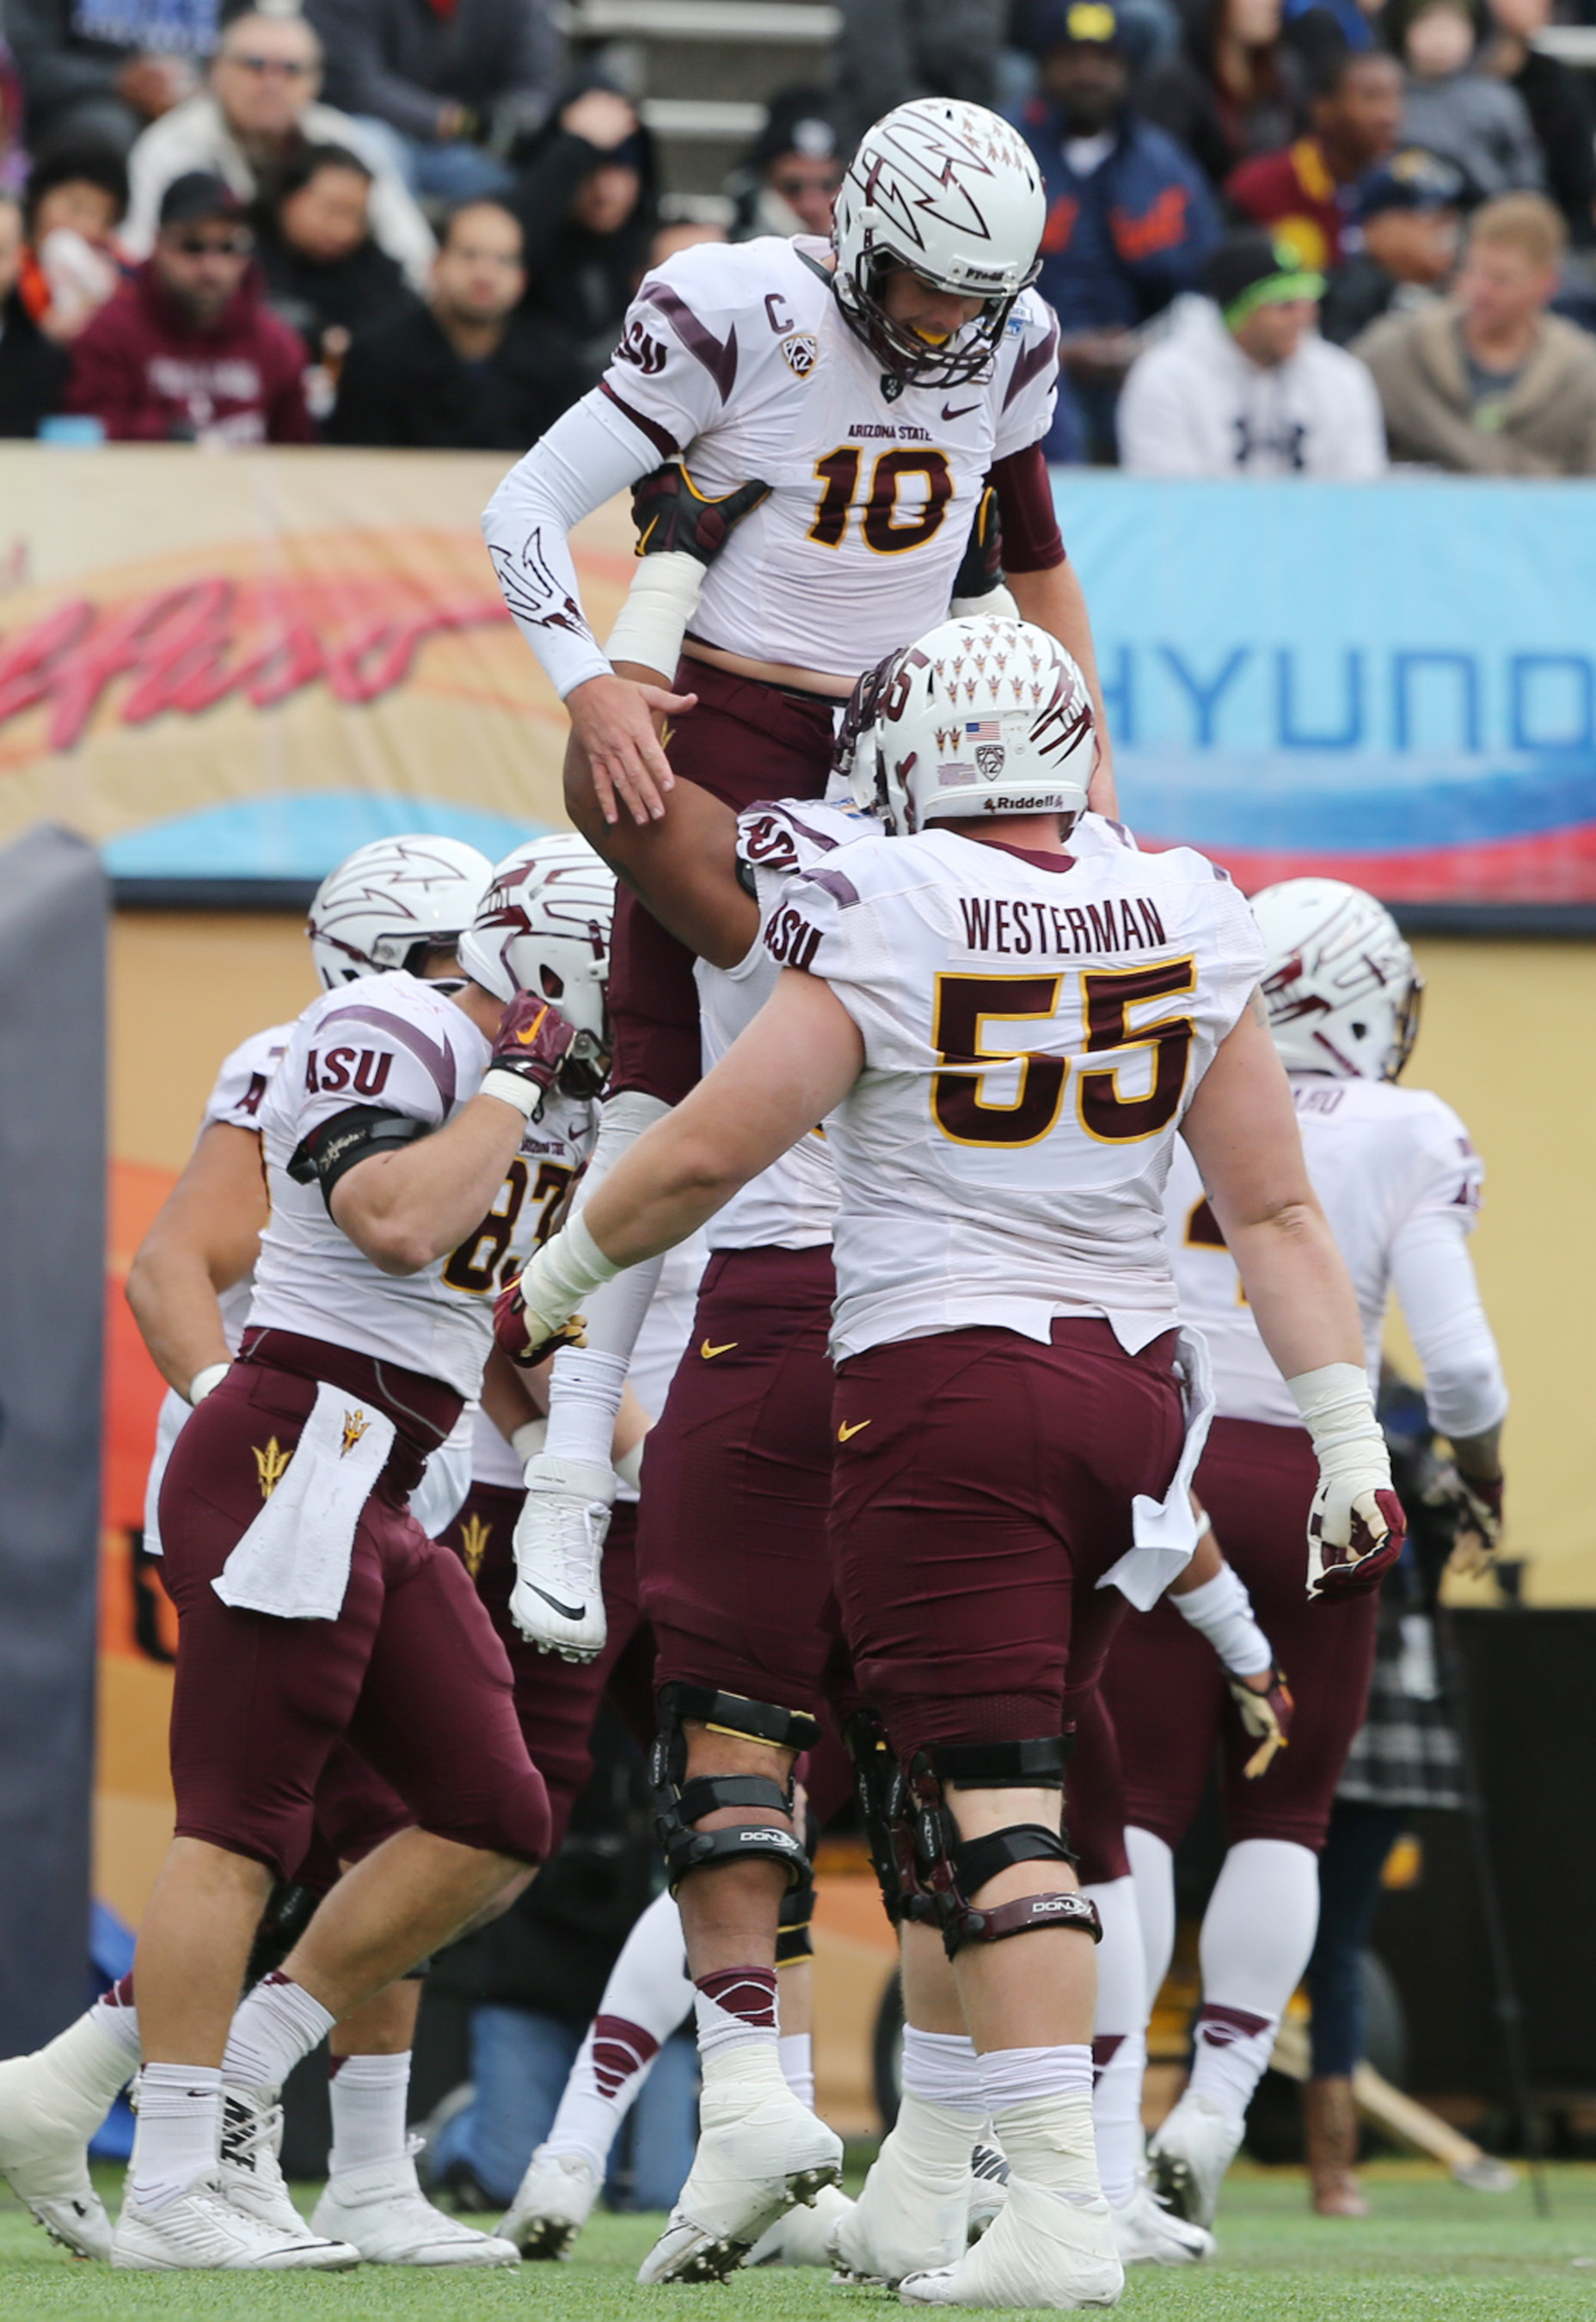 Arizona State quarterback Taylor Kelly was hoisted by teammates after scoring during the first quarter of the Sun Bowl NCAA college football game against Duke, Saturday, Dec. 27, 2014, in El Paso, Texas. (AP Photo/Victor Calzada)